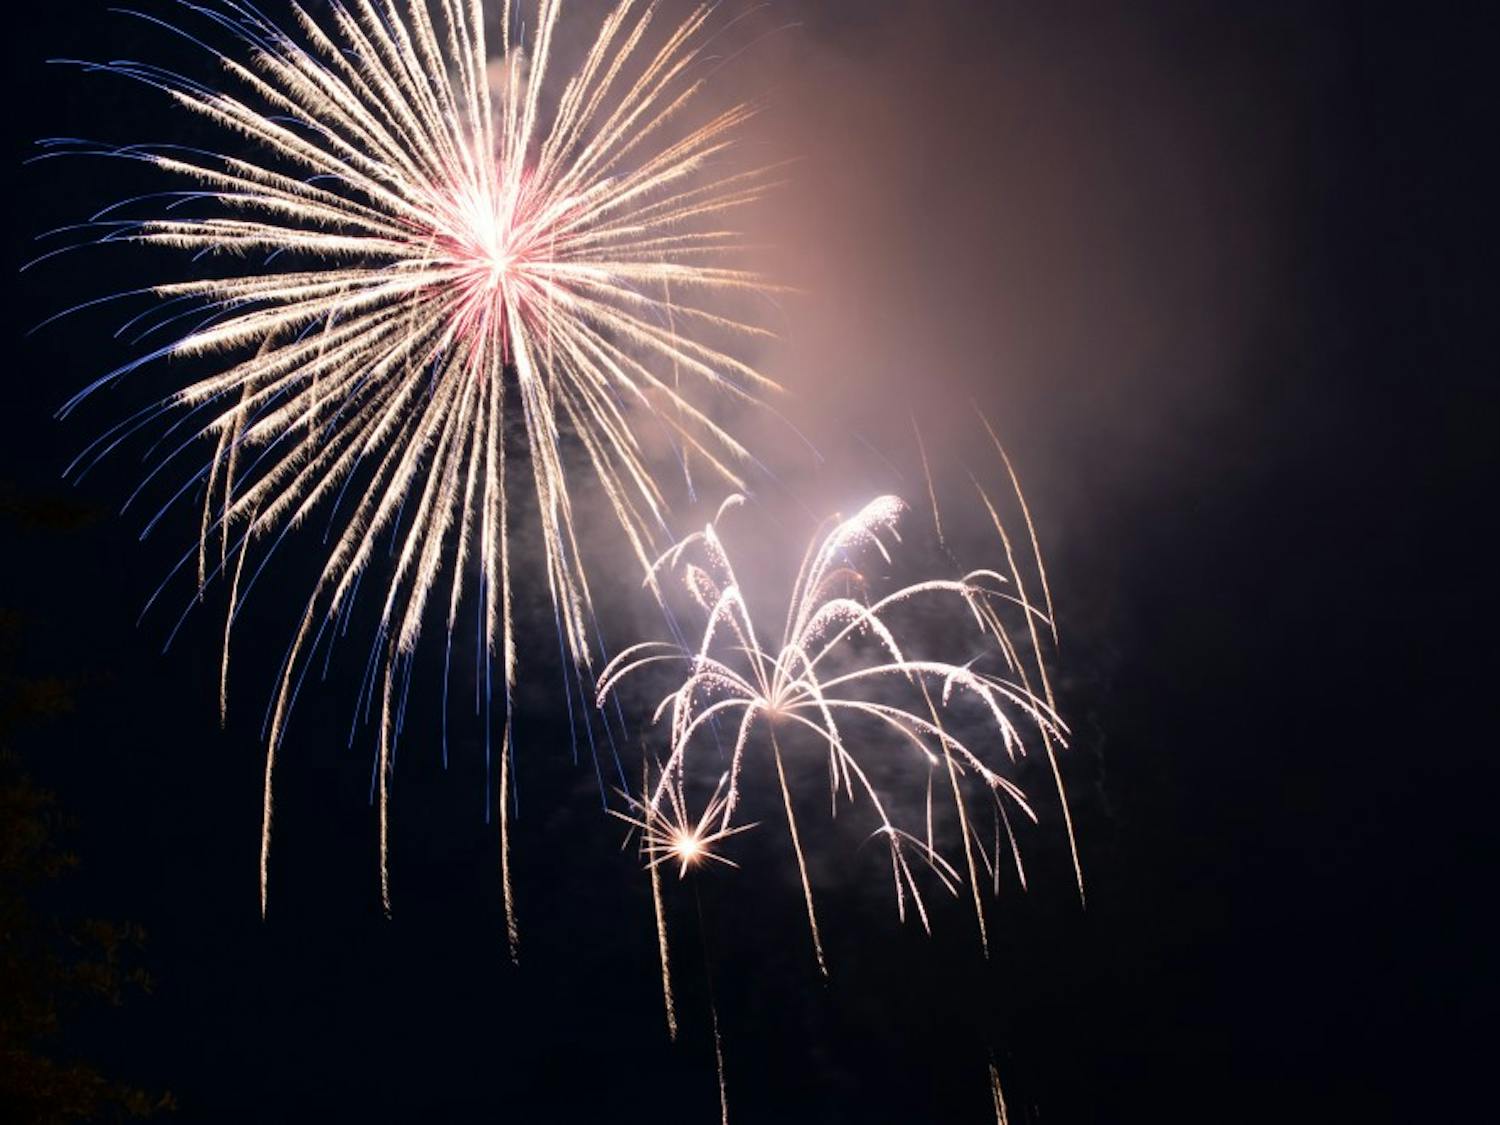 Fireworks lit up the early evening sky at the 2019 Town of Chapel Hill's Fourth of July celebration hosted at Southern Village.&nbsp;